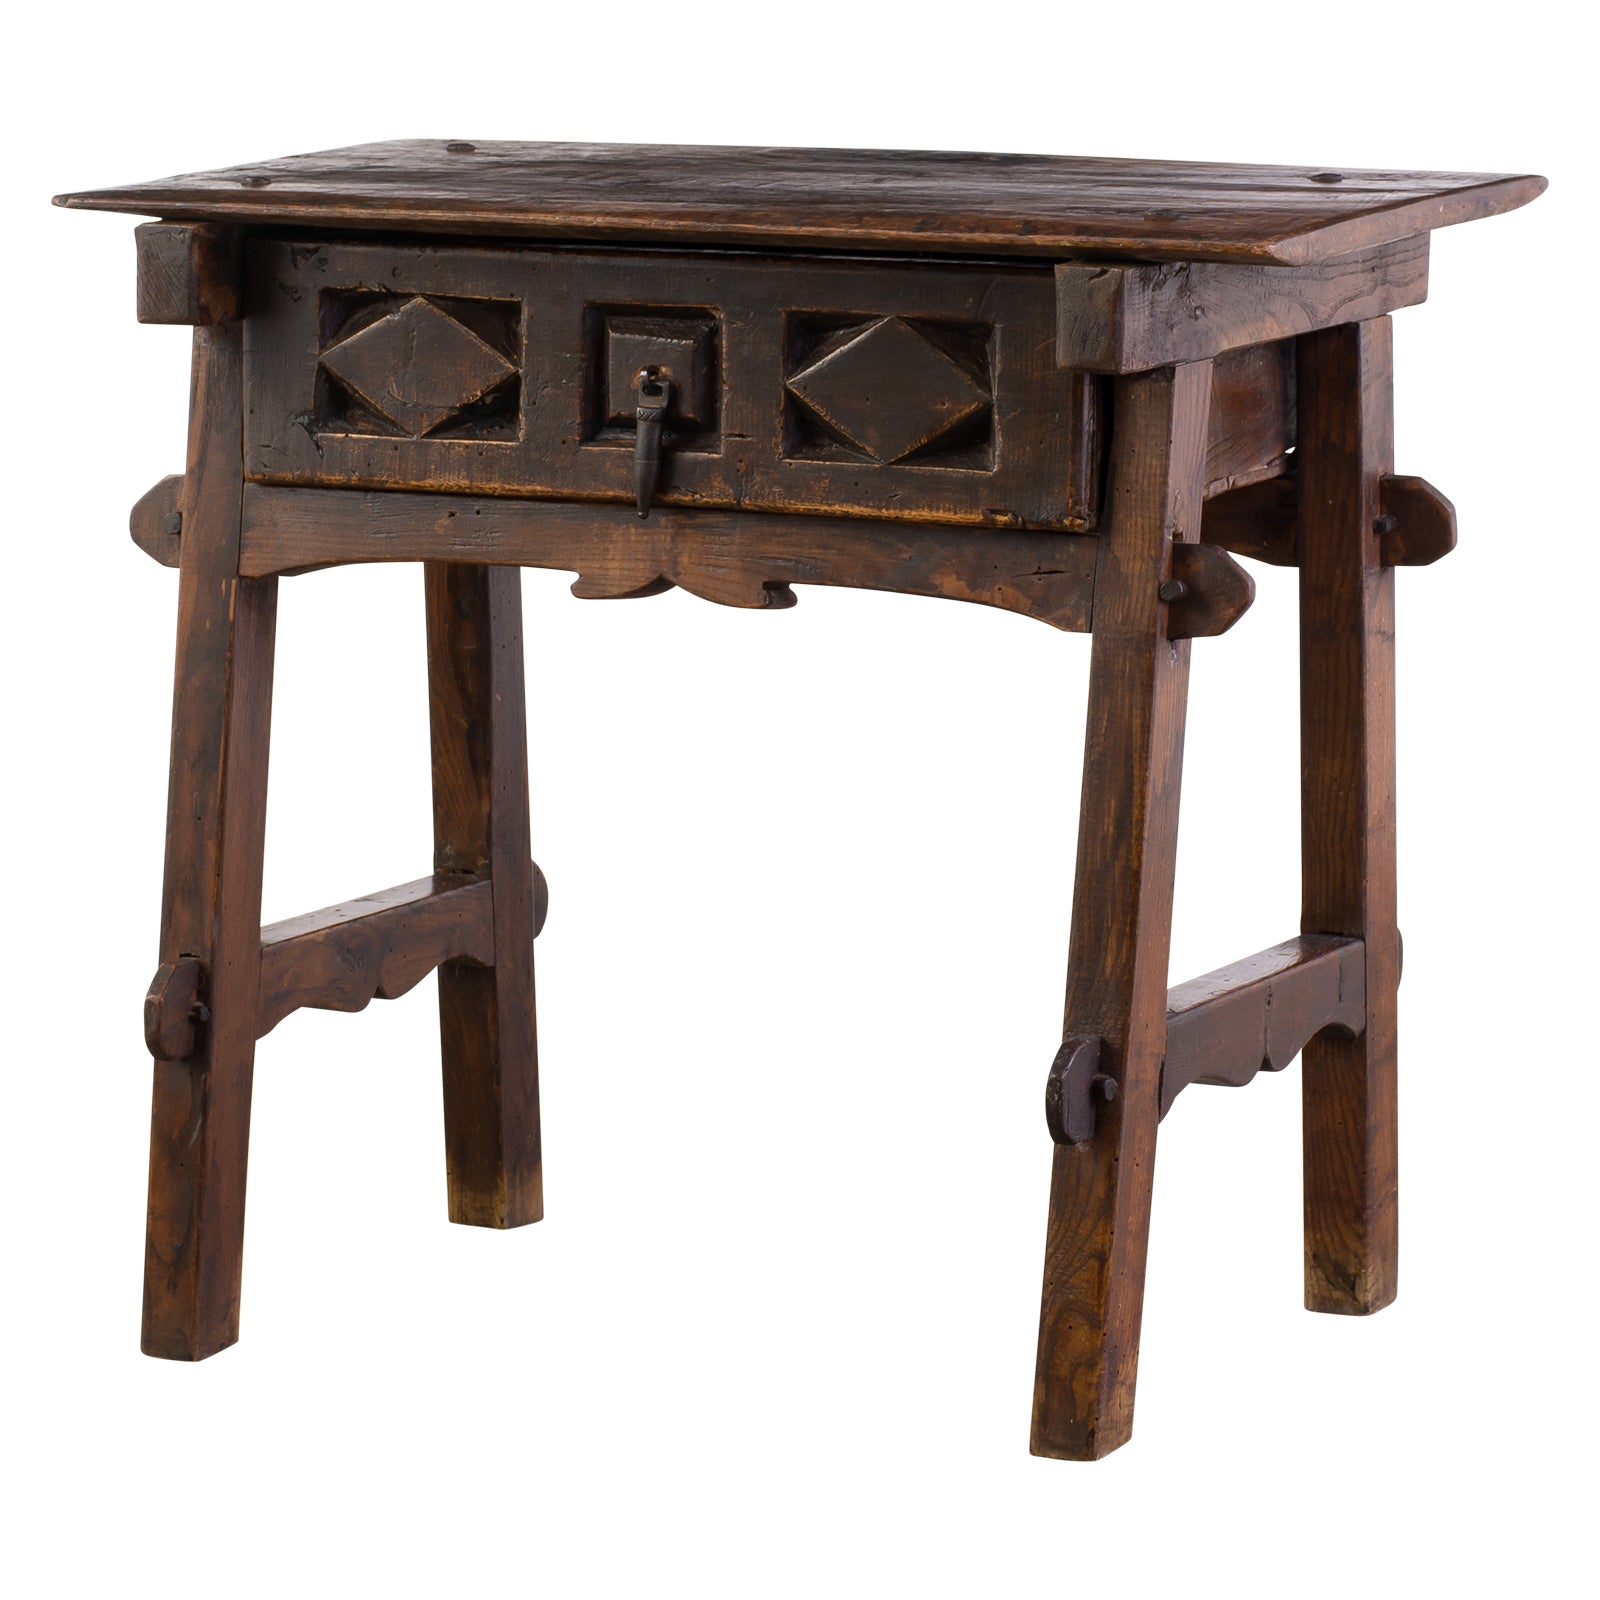 19th Centruy Spanish Provincial Side Table